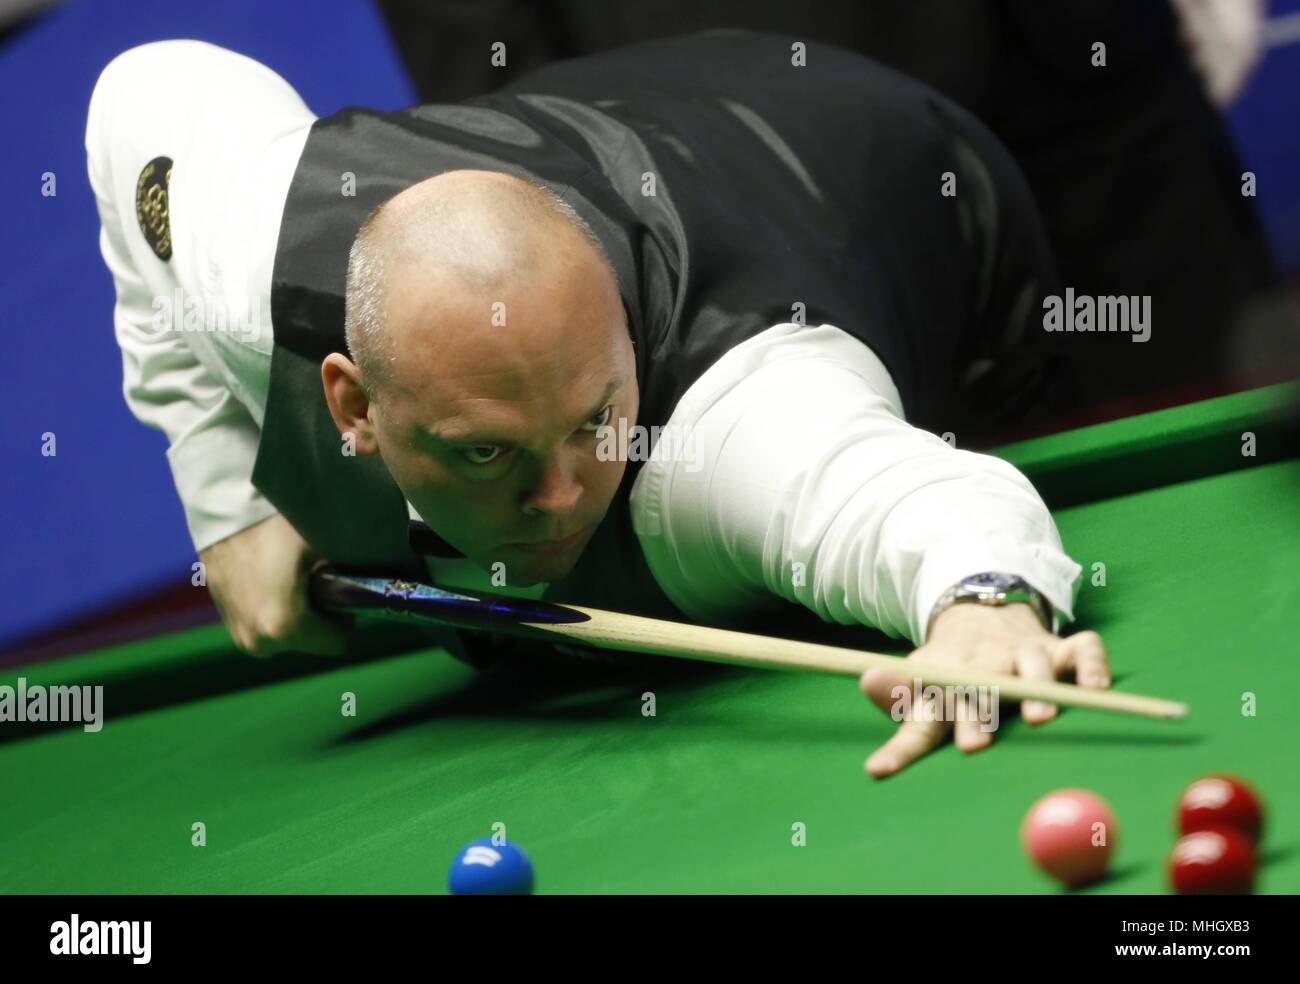 Stuart Bingham of England competes during the first round match against Ali Carter of England at the Snooker World Championship 2016 in Sheffield, Britain, on April 16, 2016